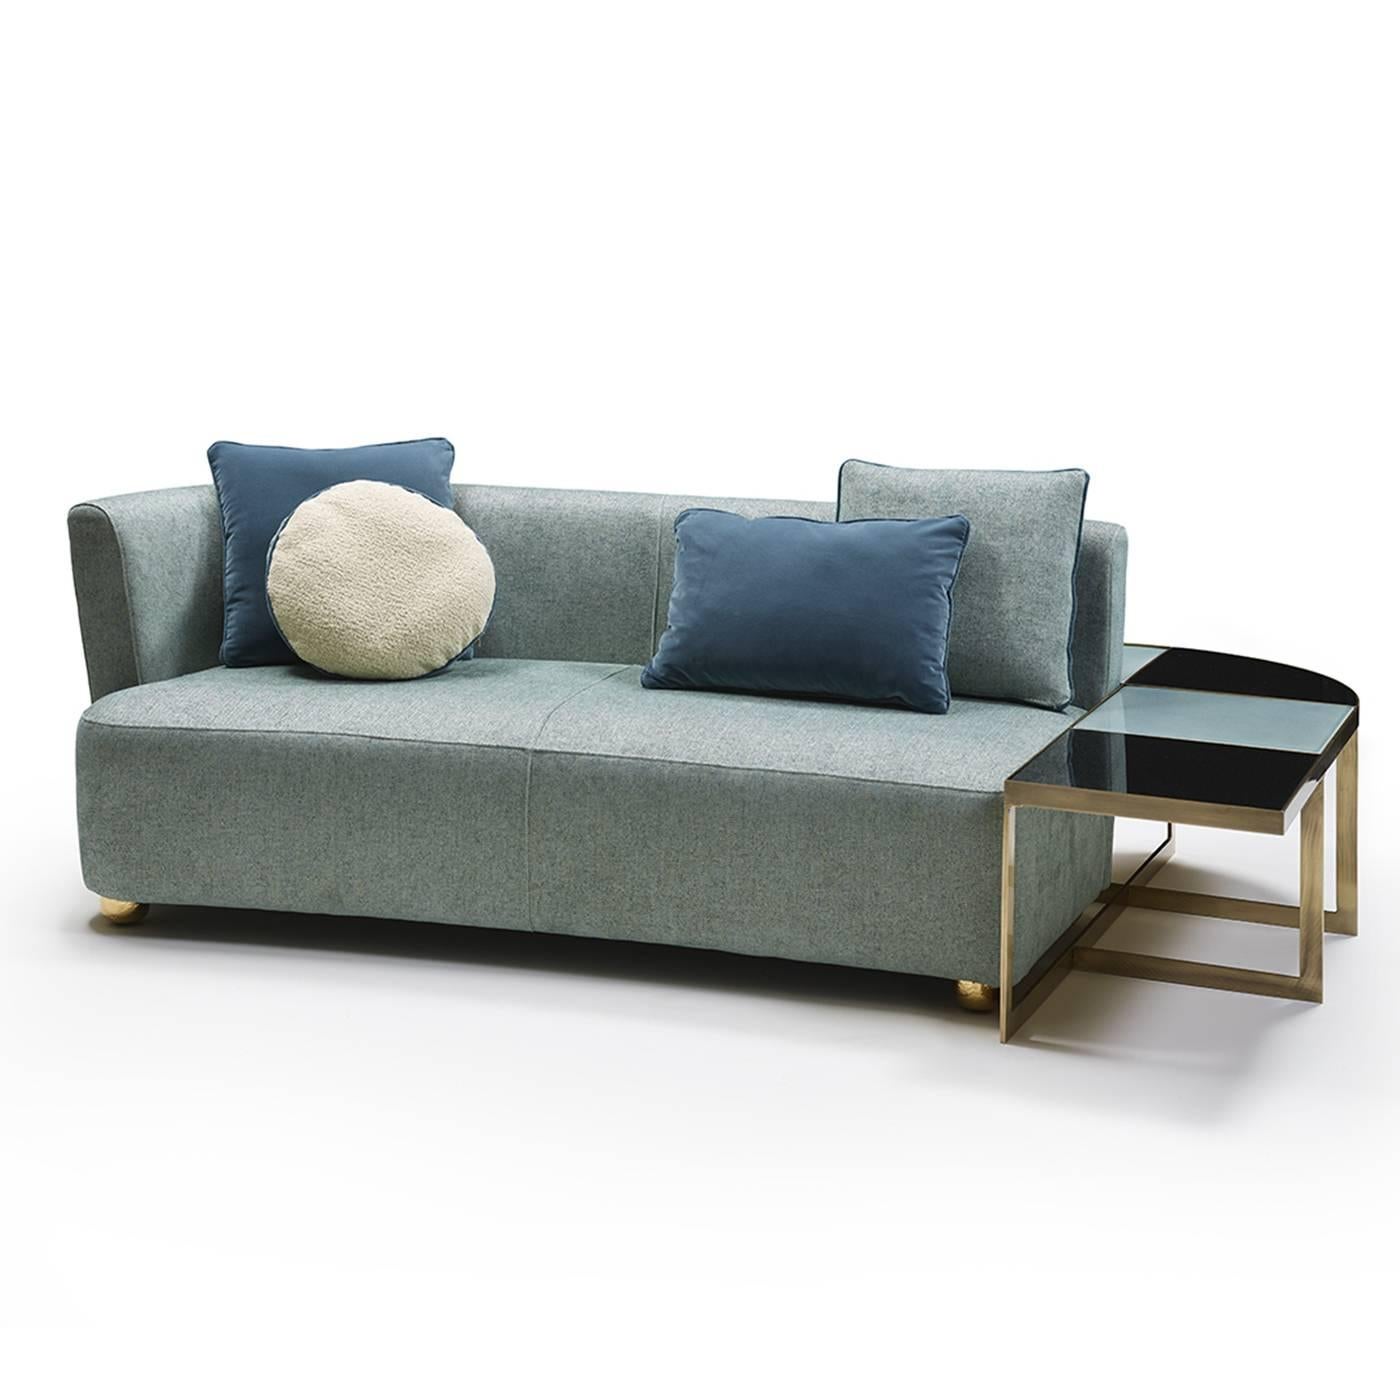 This innovative sectional sofa will enhance the look of any living room decor collection and it was designed by The Recreation for Marioni's Baia series. This sofa comprises three parts. The base of this piece is in ceramic, allowing for the sofa to